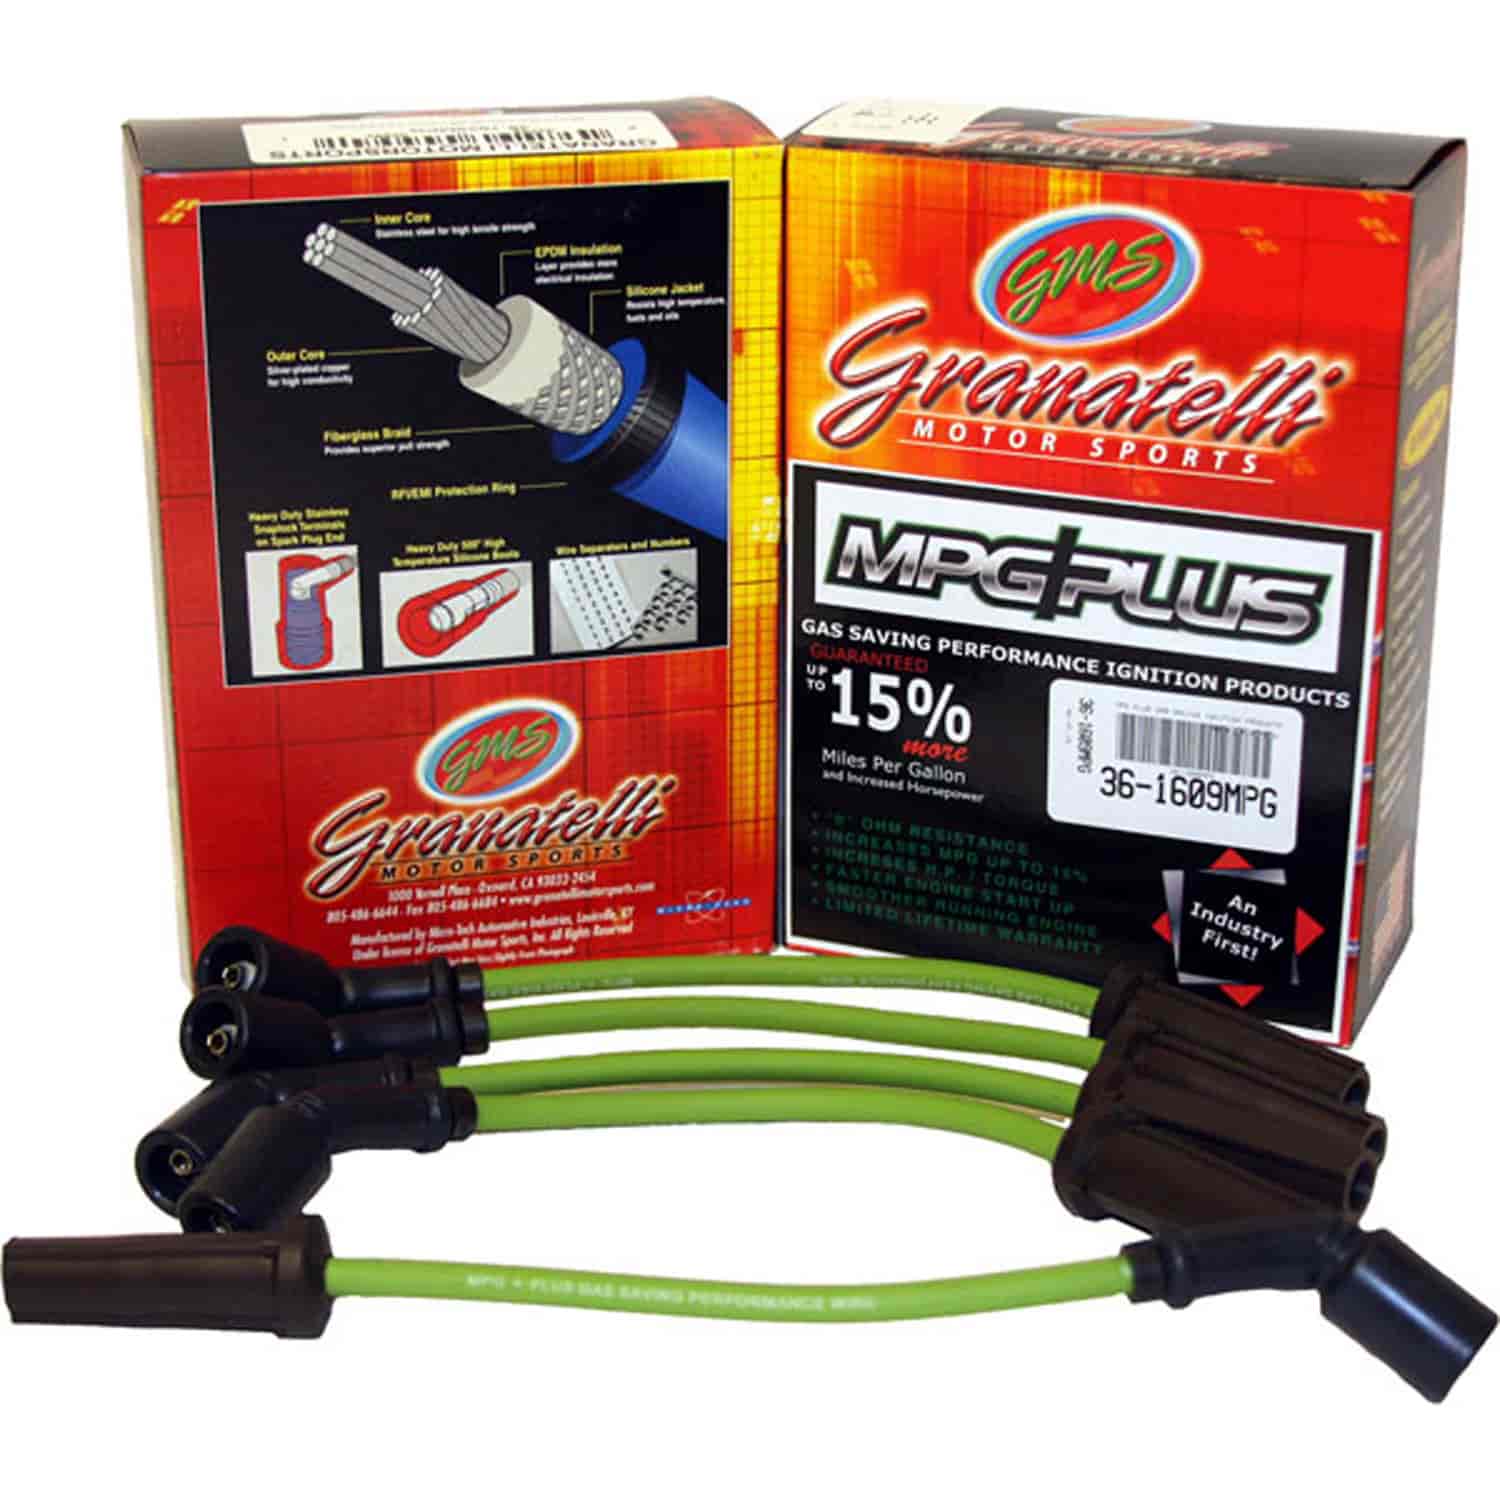 MPG Wires HONDA PRELUDE 4CYL 2.2L 97-01